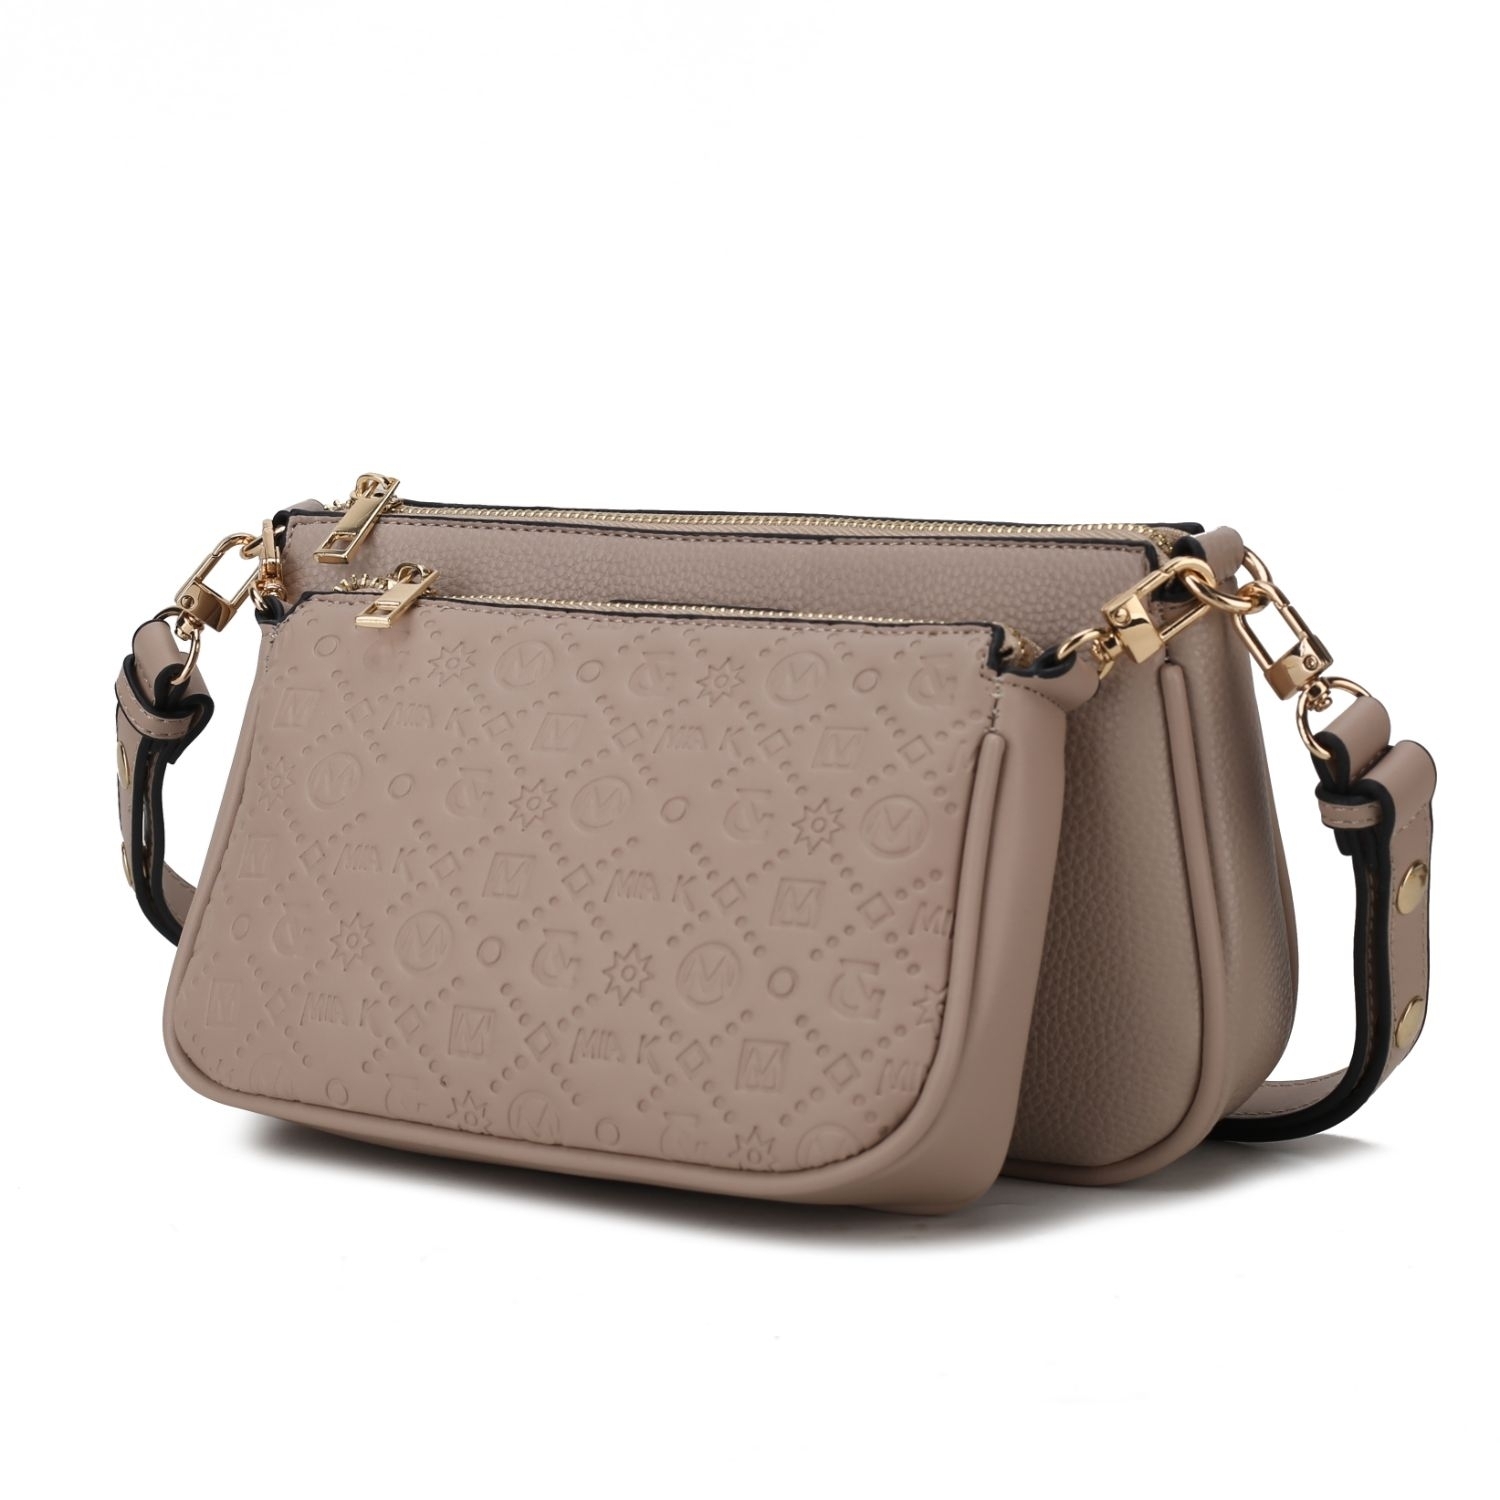 MKF Collection Dayla Vegan Leather Women's Shoulder Bag By Mia K -2 Pieces - Taupe